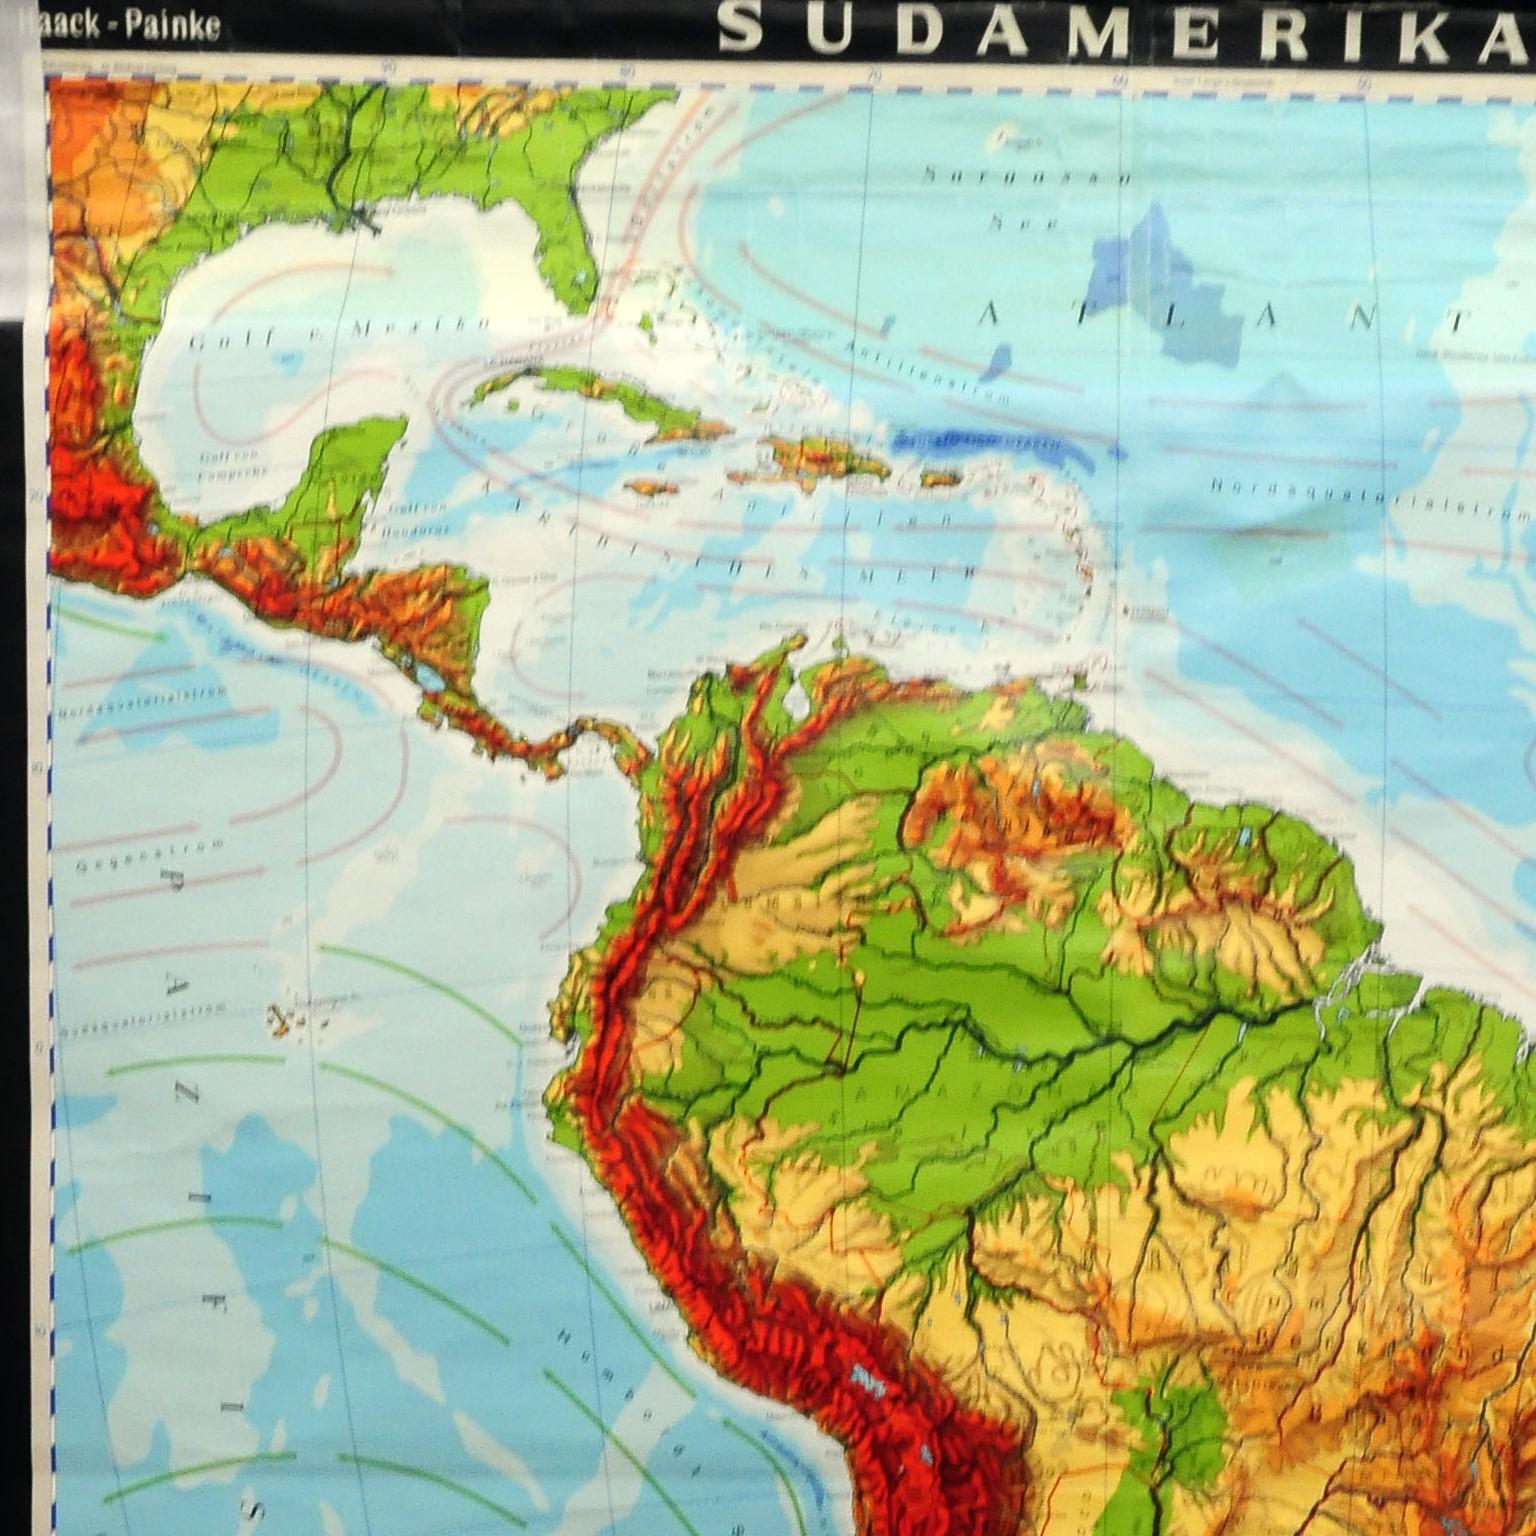 The wall map shows South America. It was published by Haack Paincke, Justus Perthes Darmstadt. Used as teaching material in German schools. Colorful print on paper reinforced with canvas. There are adhesive stripes on the top left and right of the